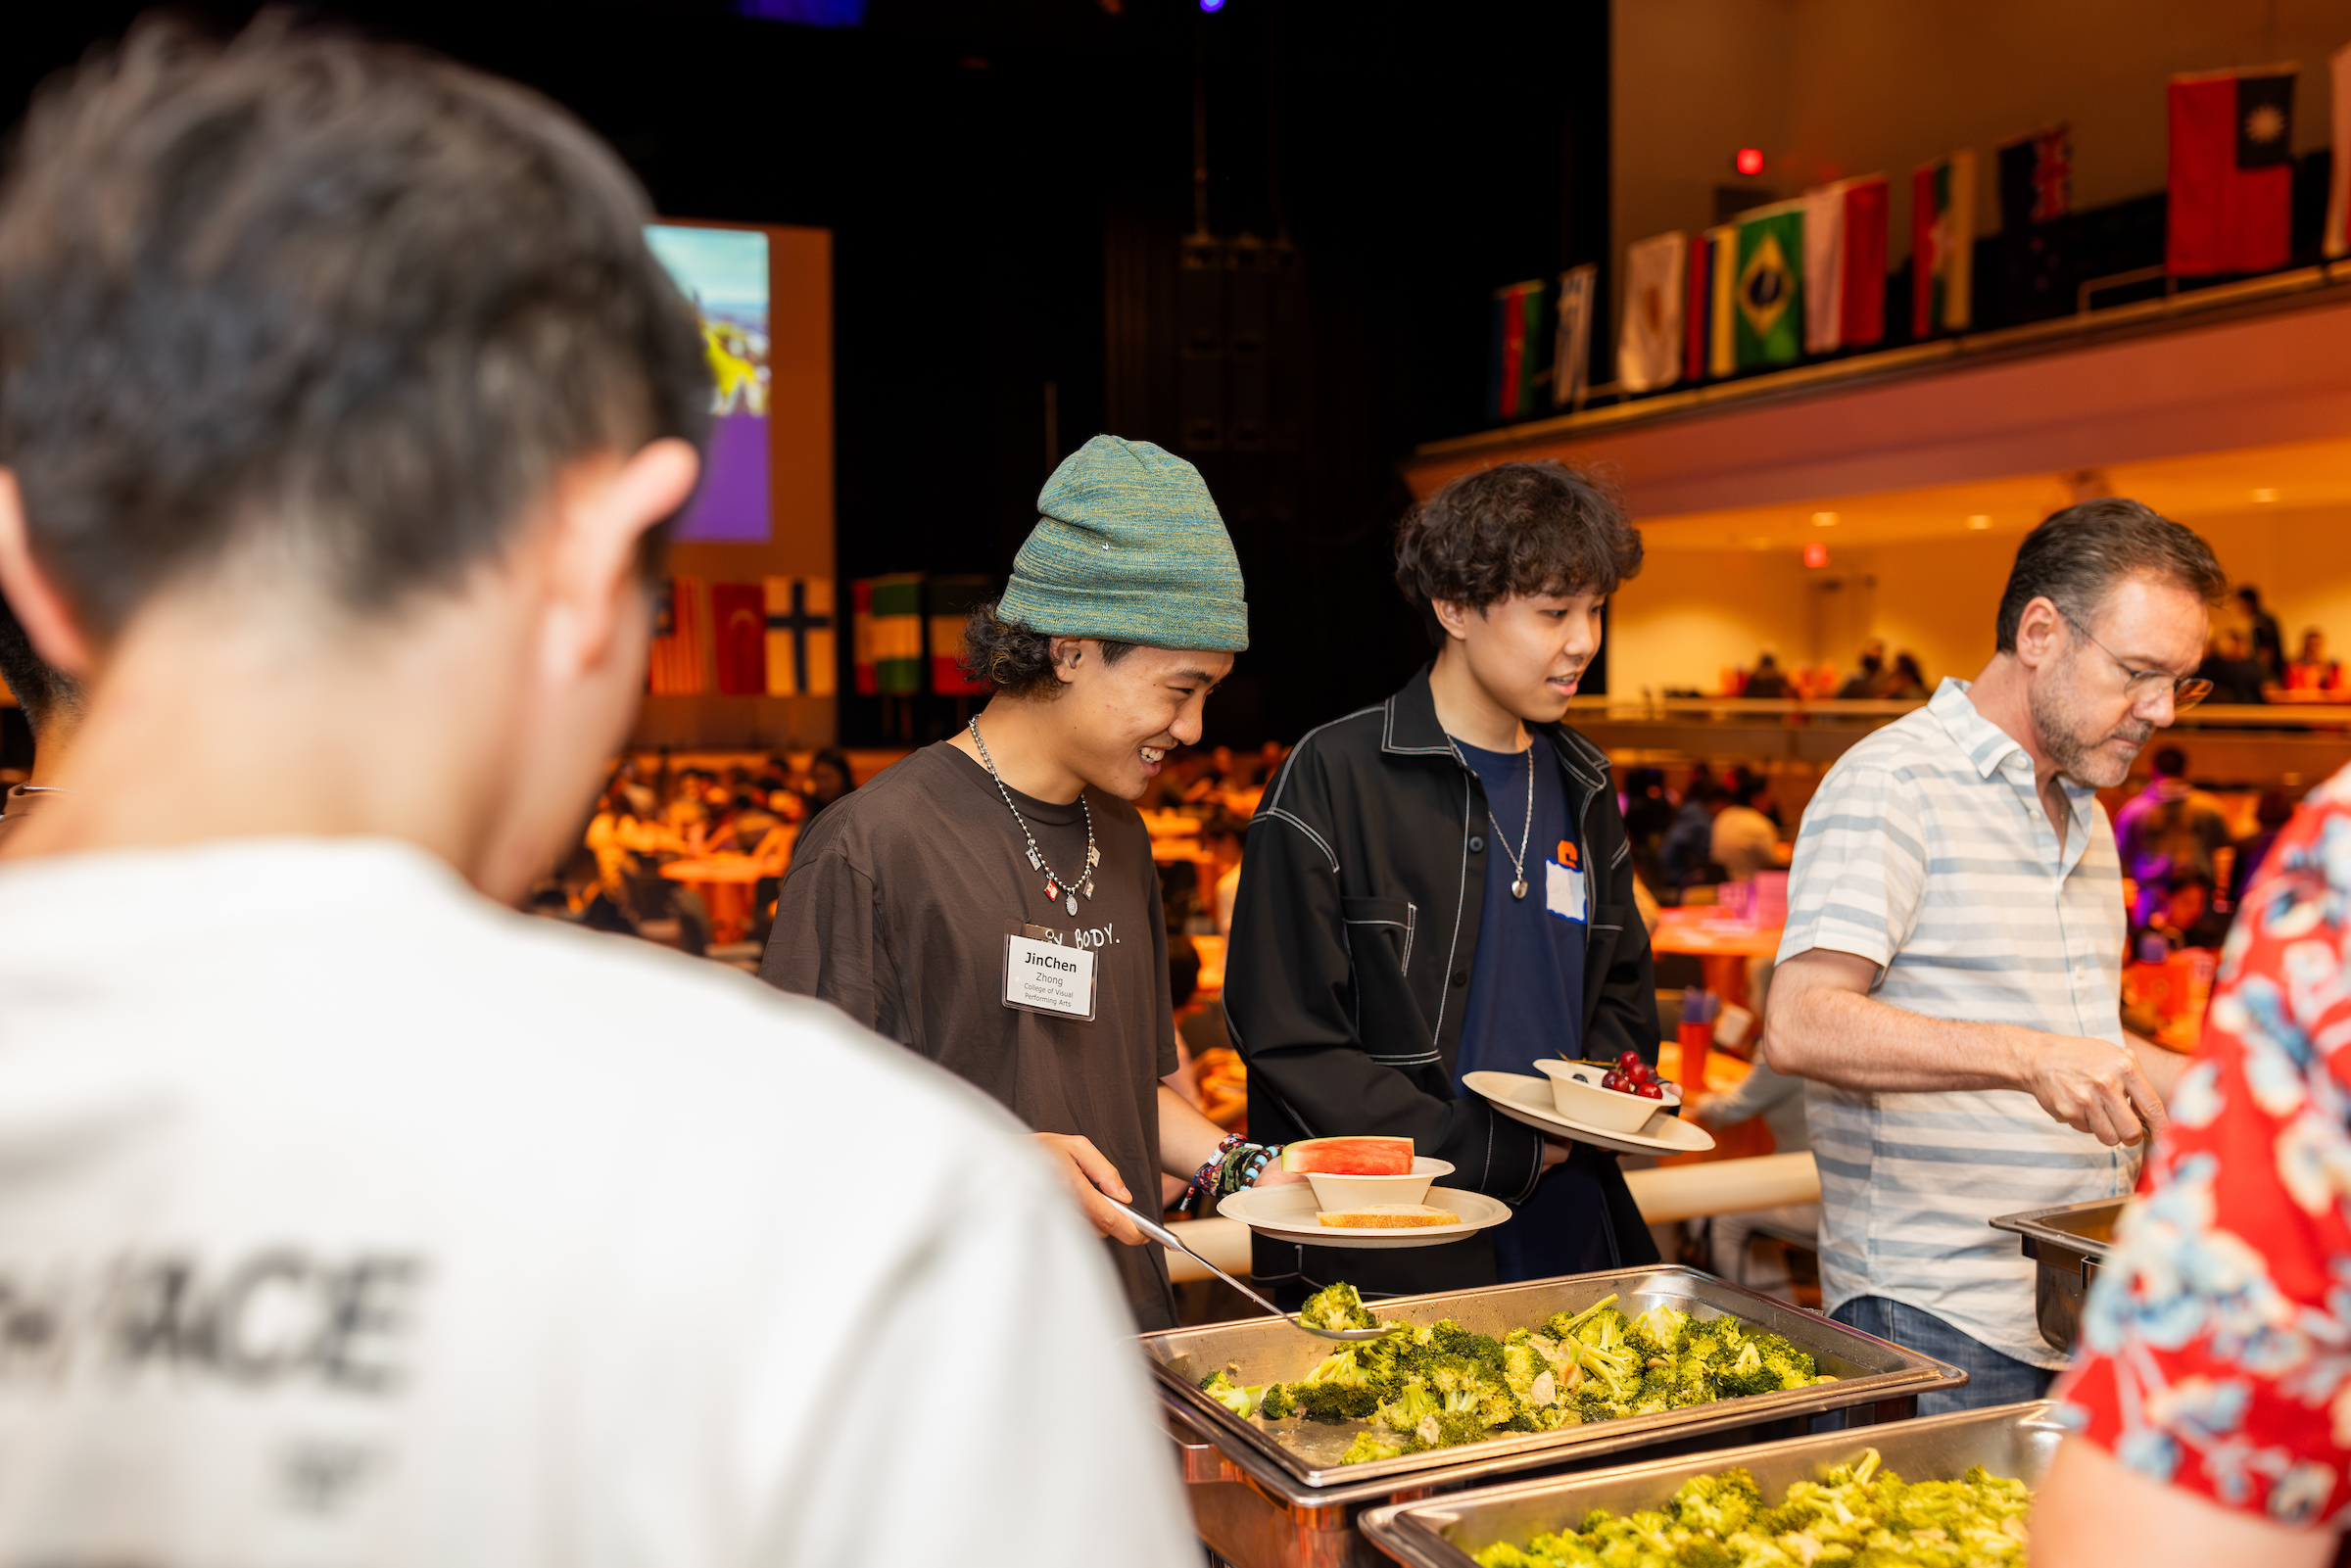 Several students standing in a buffet line getting food.